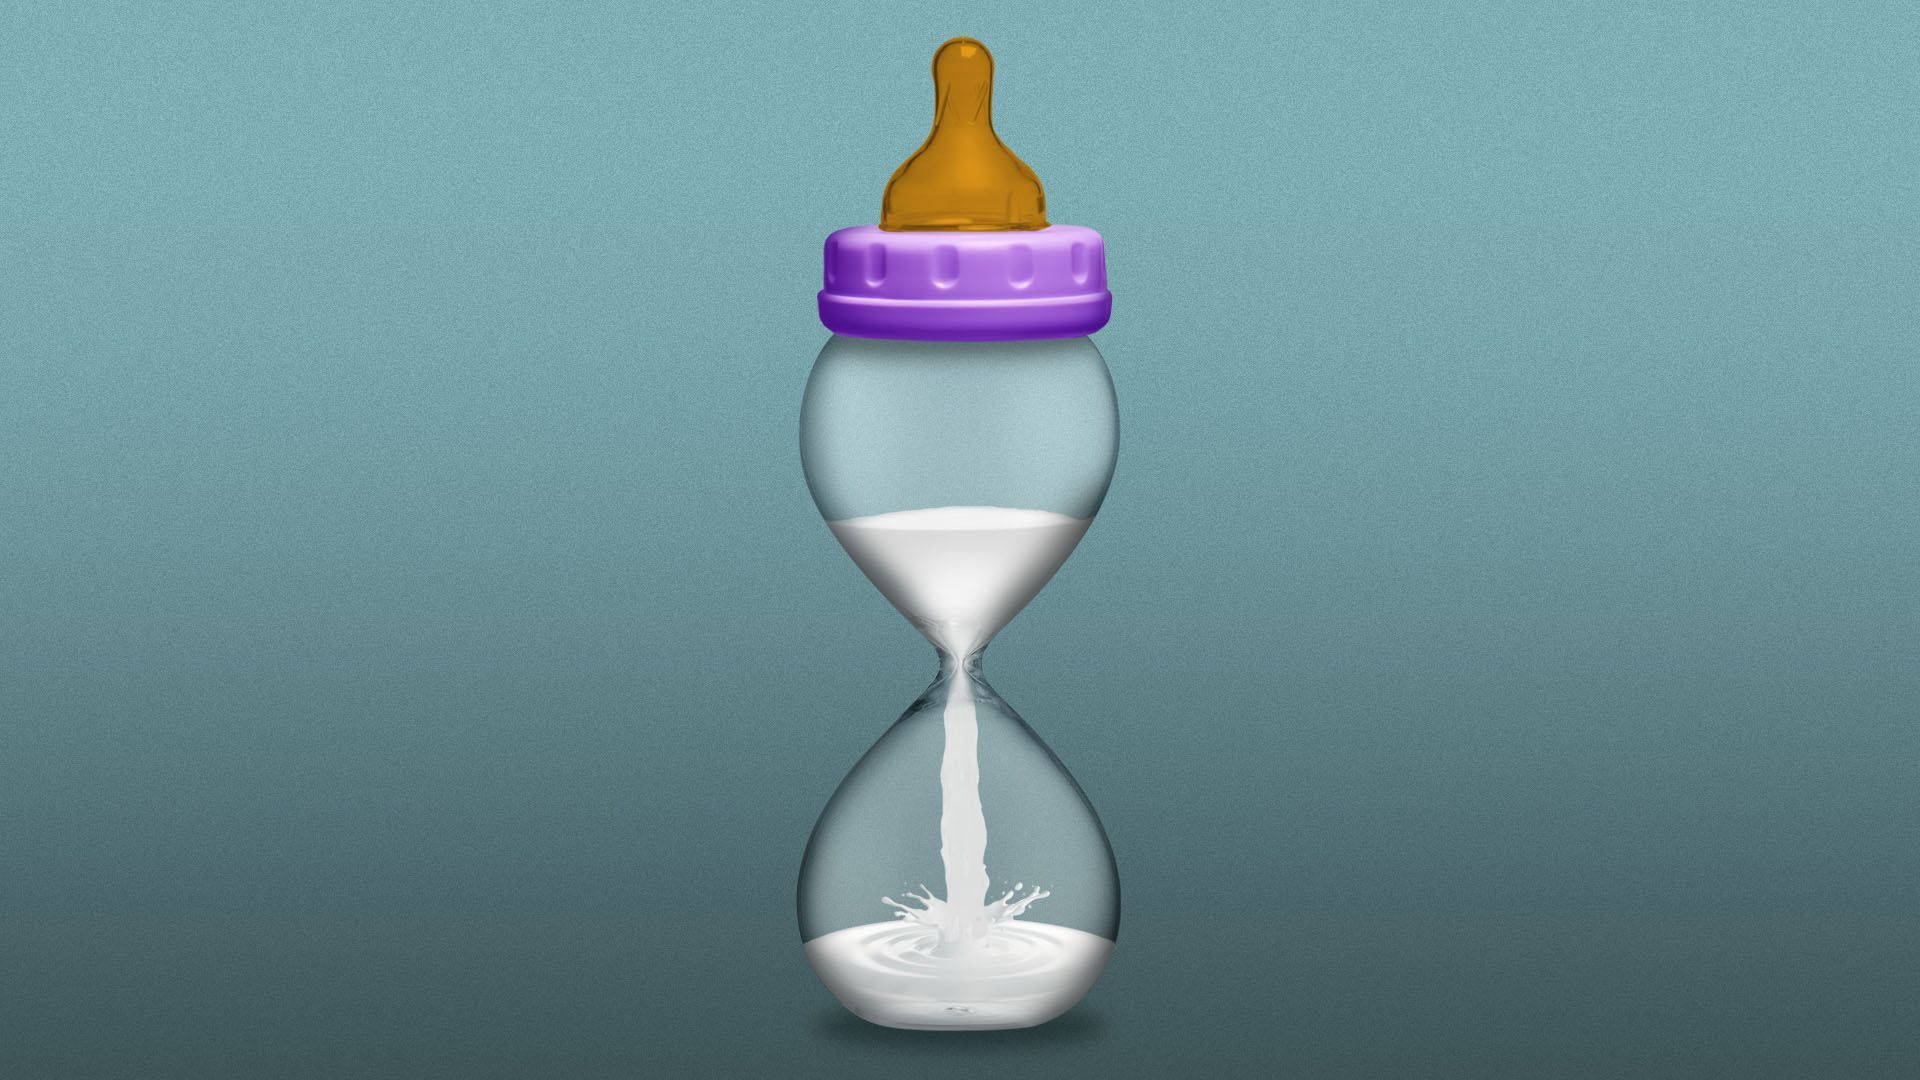 Illustration of a baby bottle in the shape of an hour glass